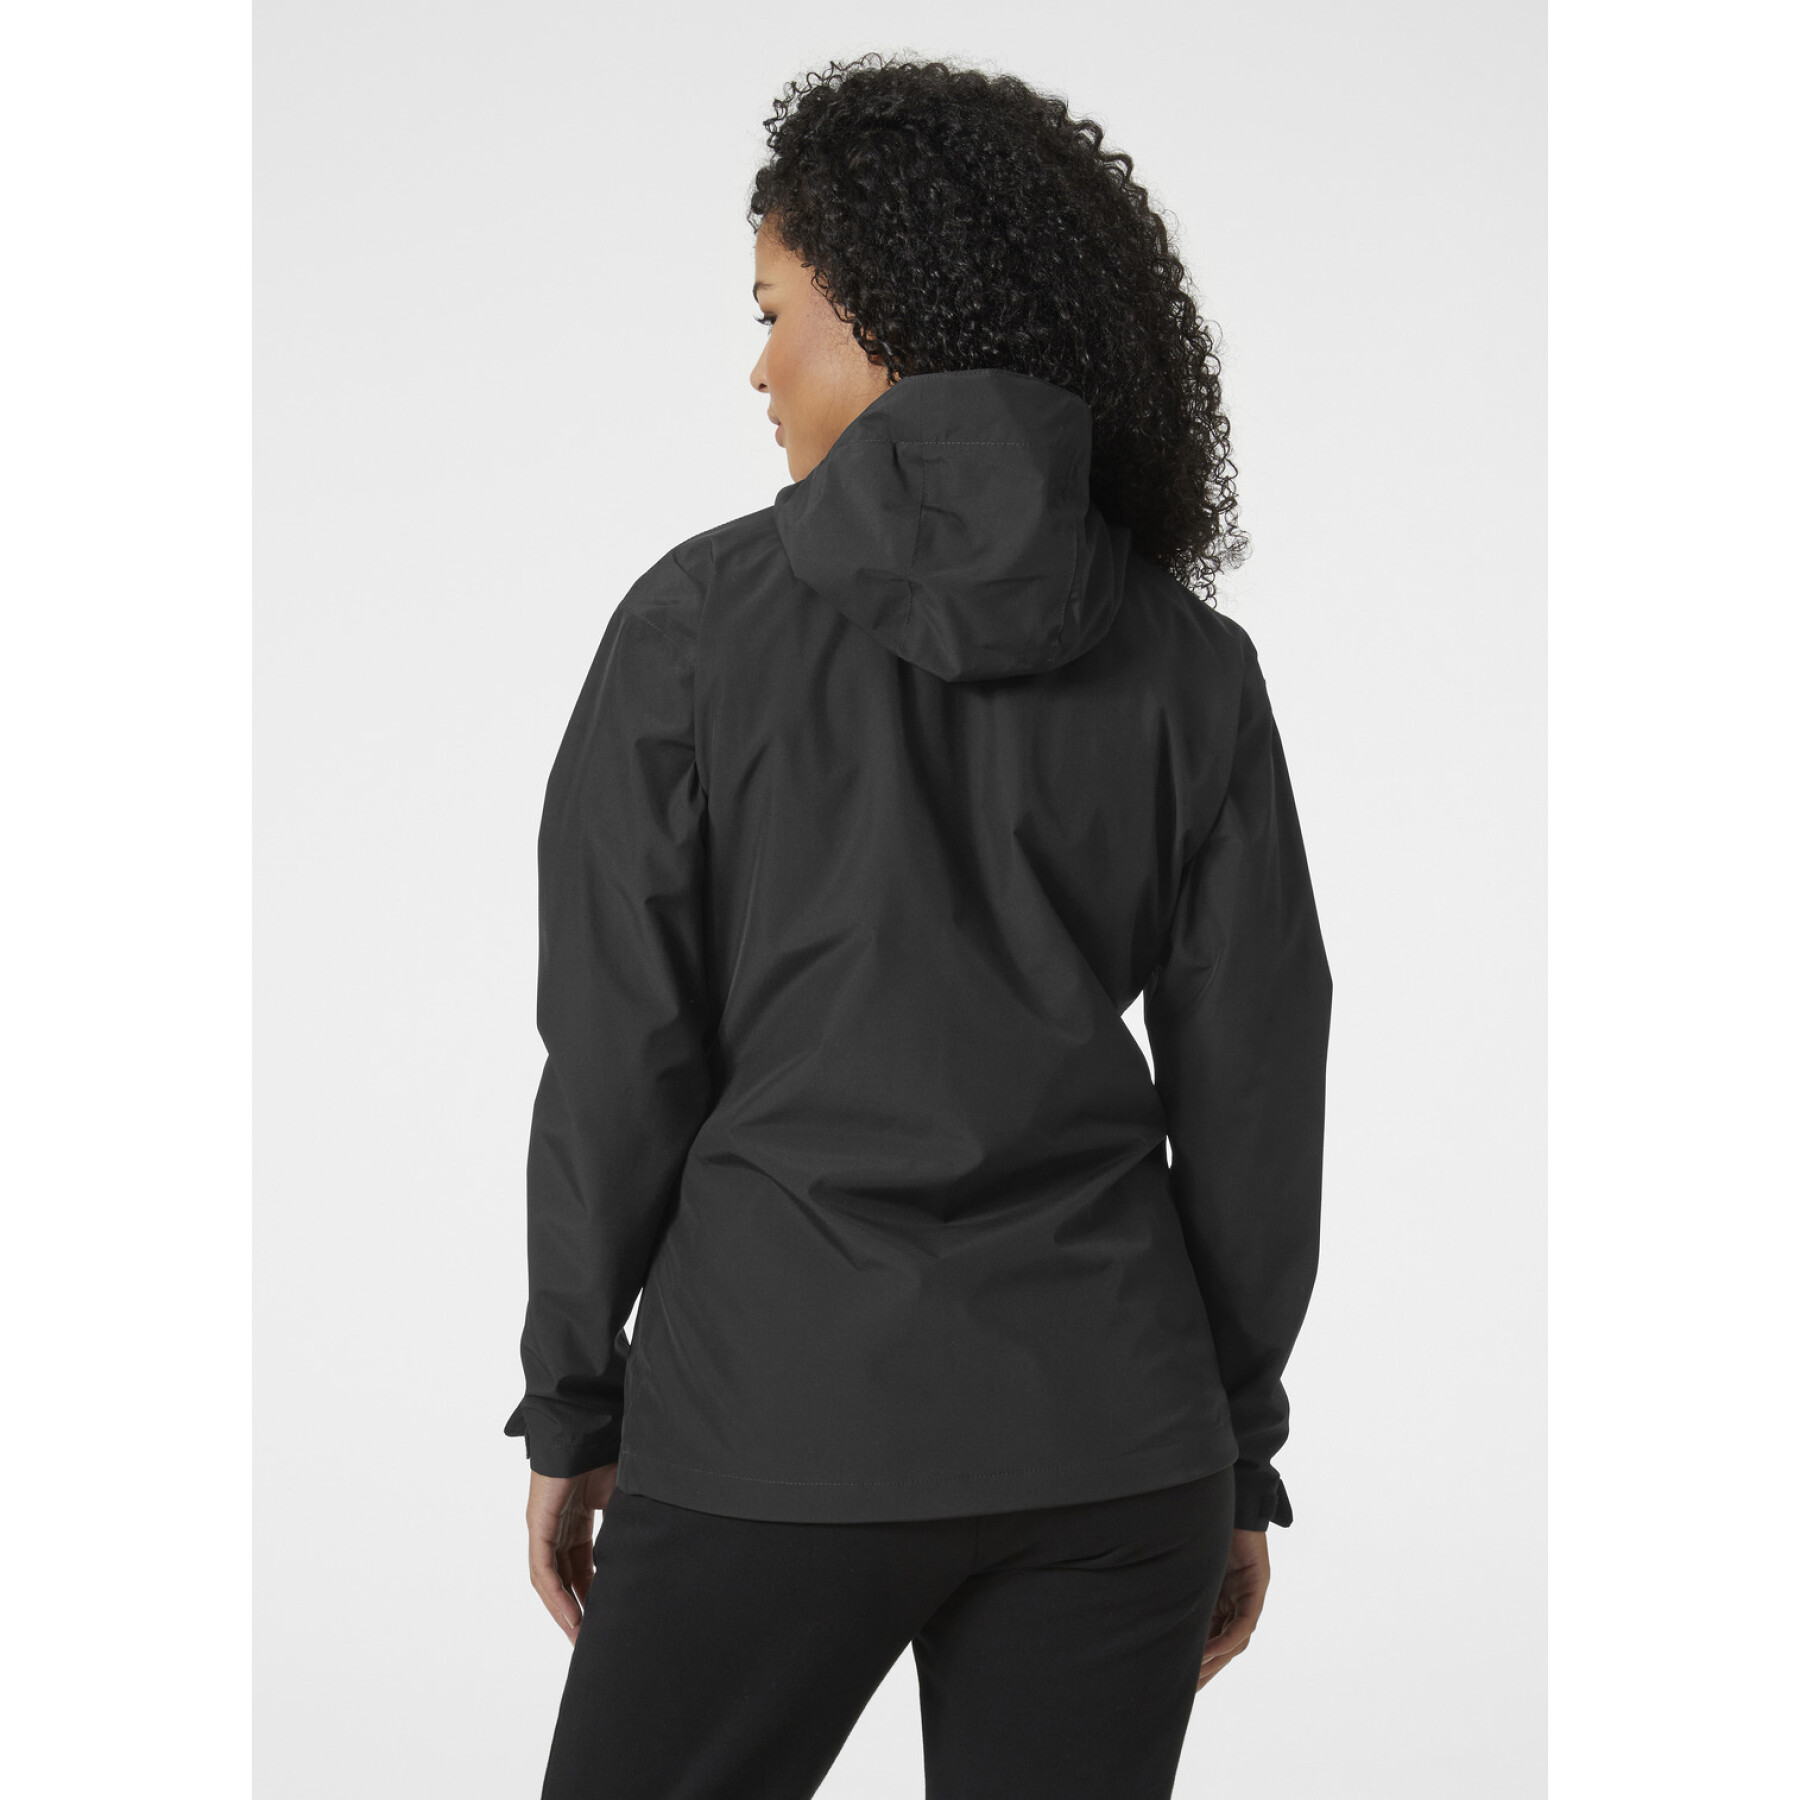 Chaqueta impermeable mujer Helly Hansen Portland